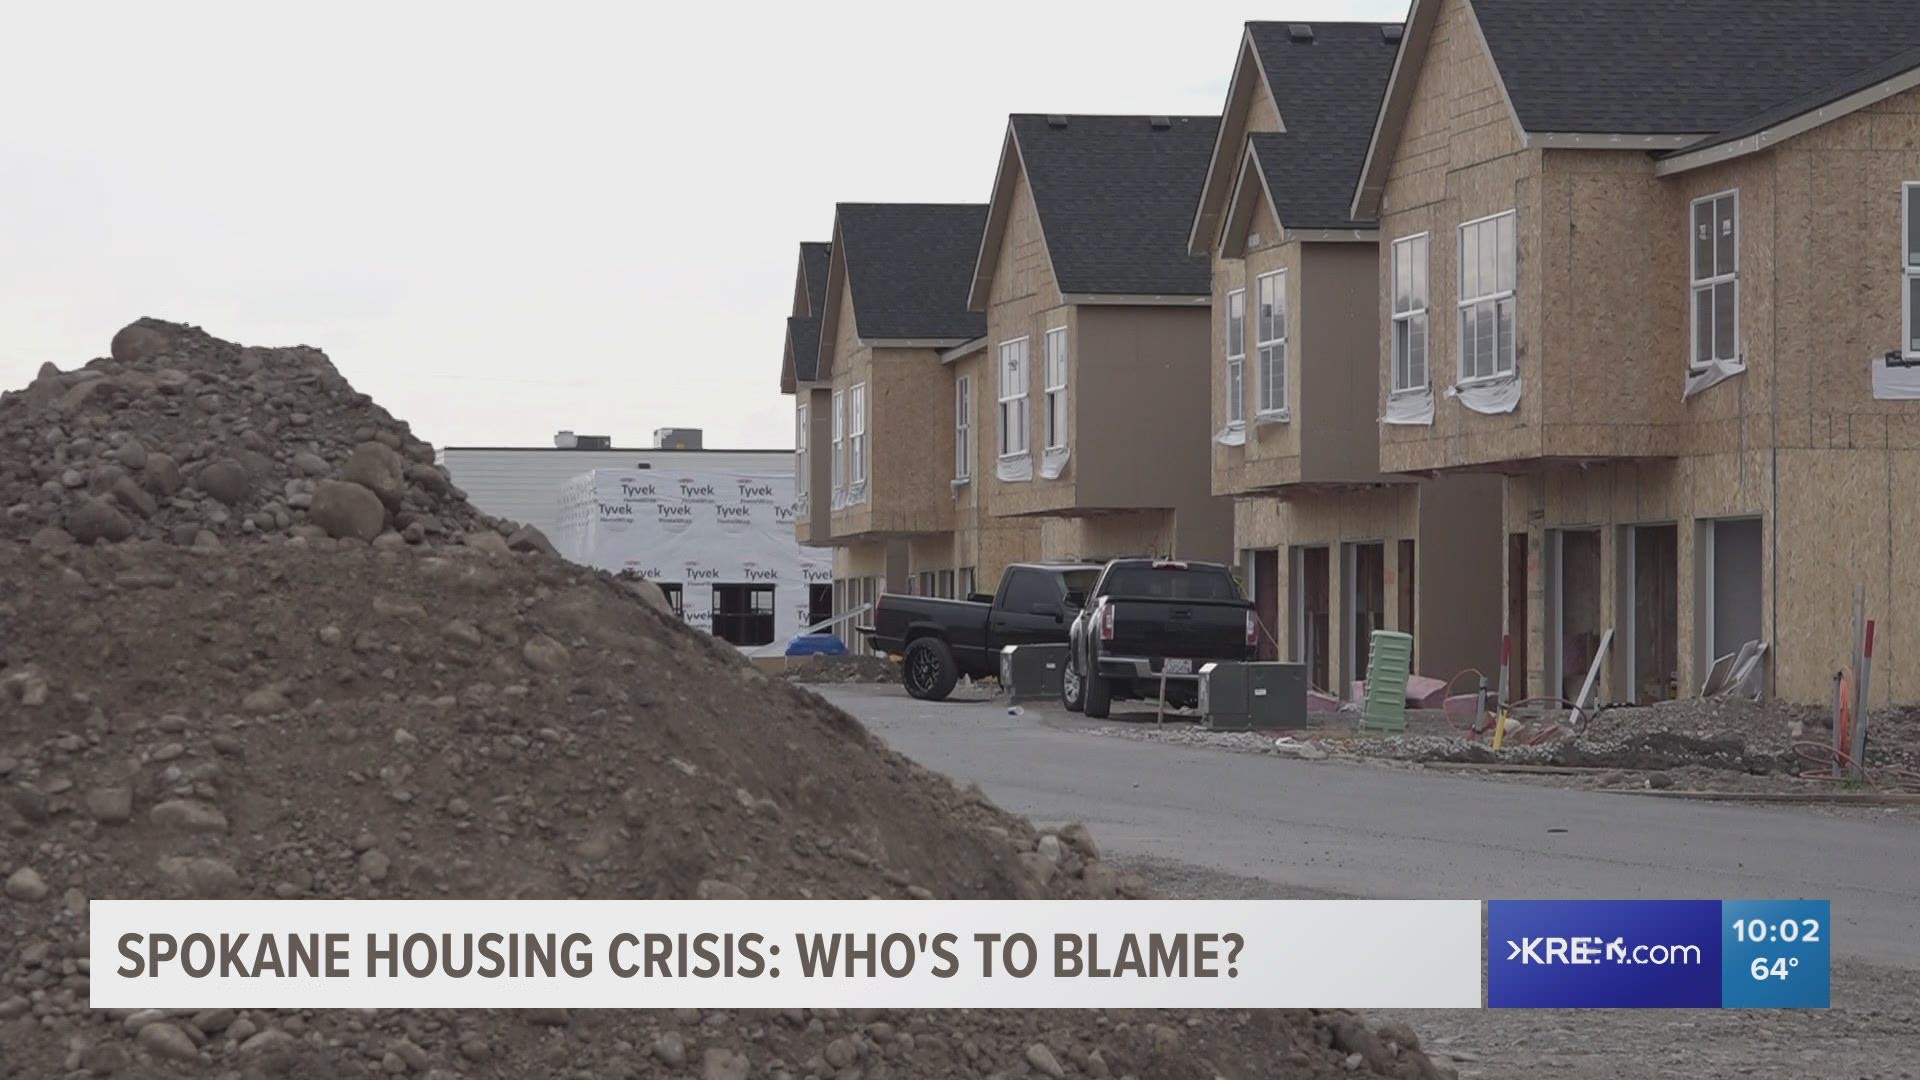 Home Builders Association claims city council isn't prioritizing the housing crisis; President Beggs calls claim a cherry-picking 'hit-piece'